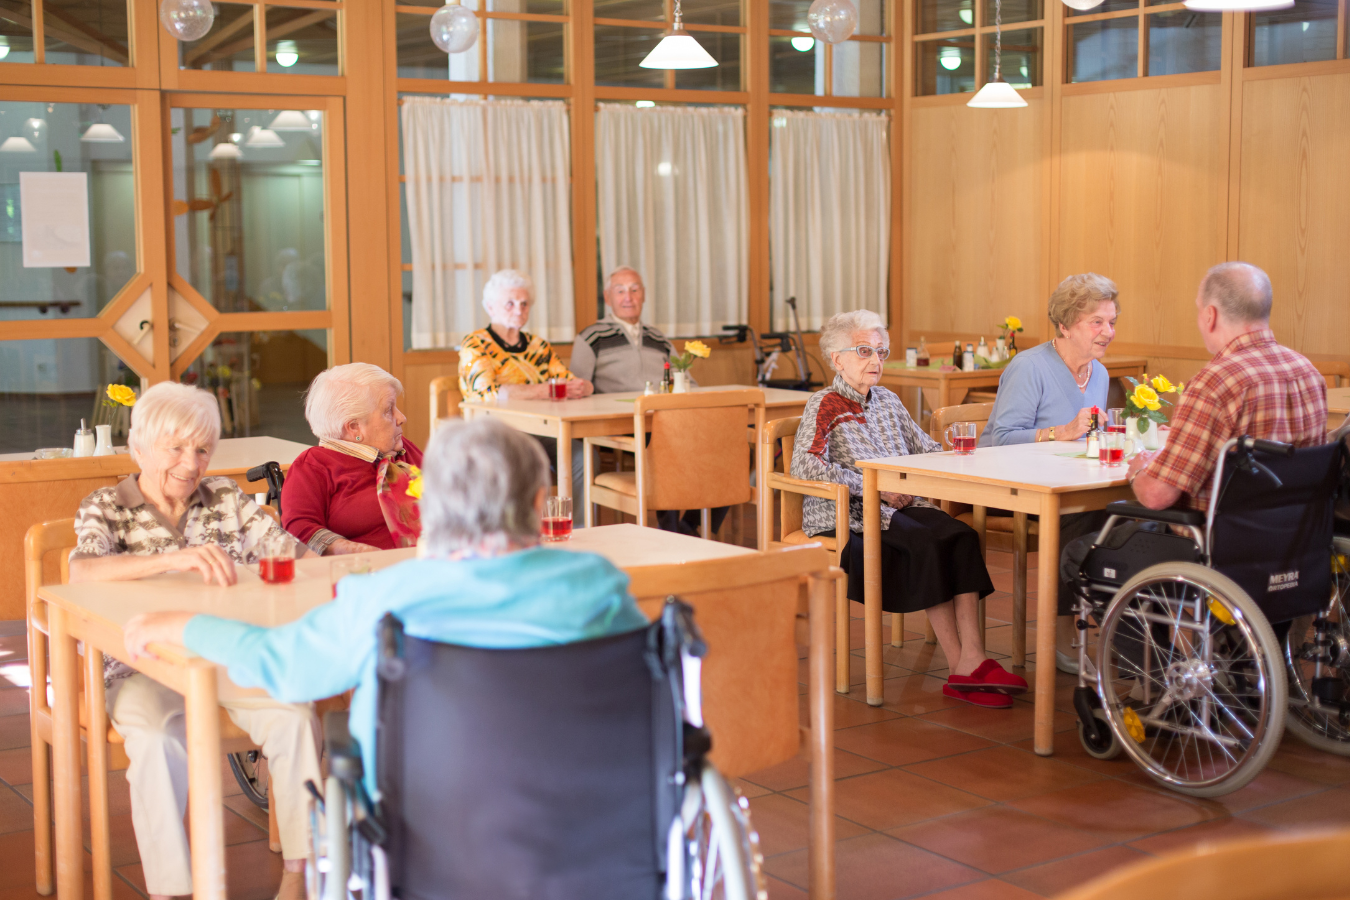 Residents in a long-term care home, residential care facility wait for dinner together in the dining room.